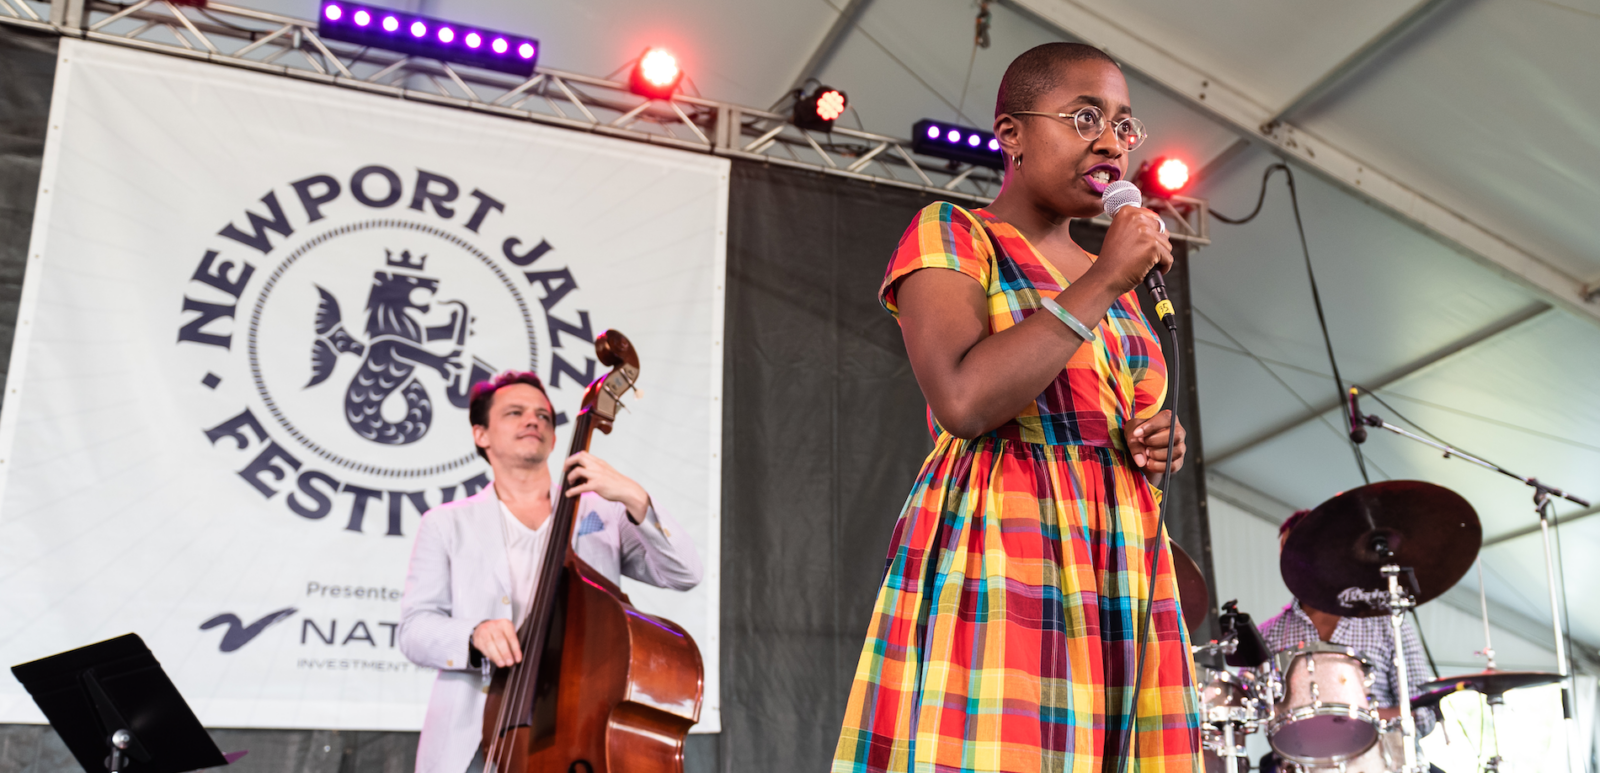 Cecile McLorin Salvant performs at The Newport Jazz Festival in Rhode Island.